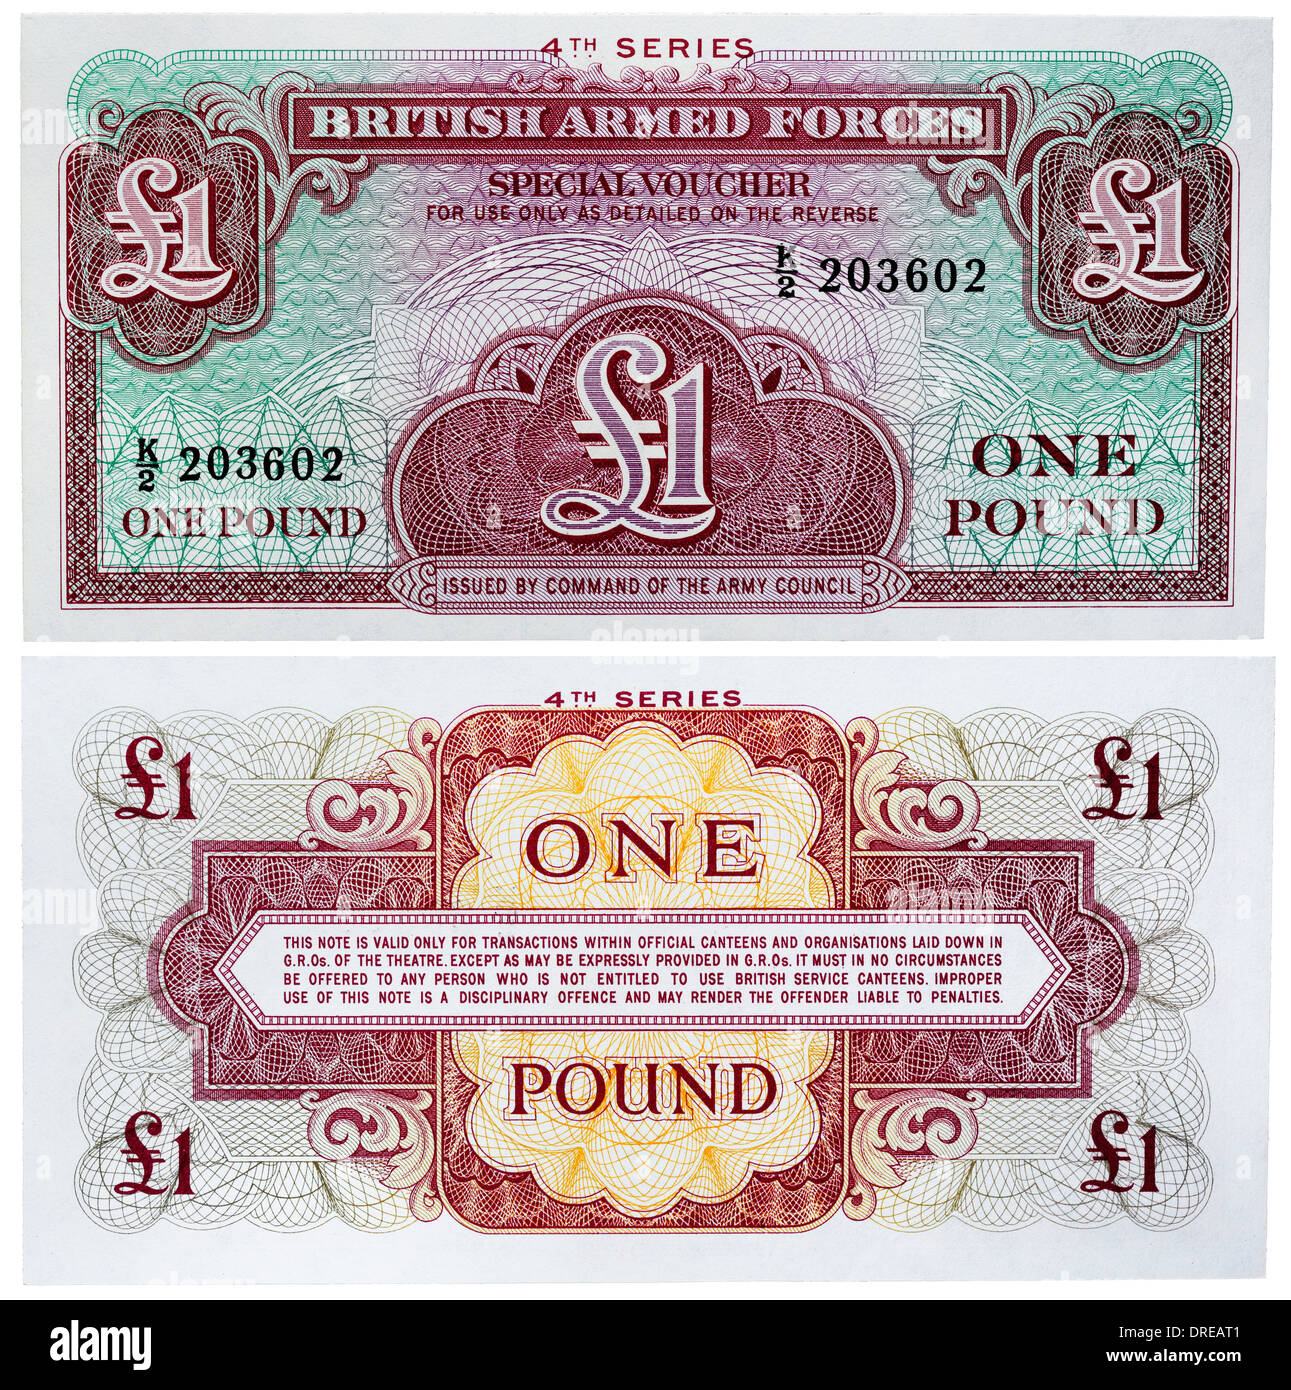 1 Pound banknote, British Armed Forces, 1962 Stock Photo